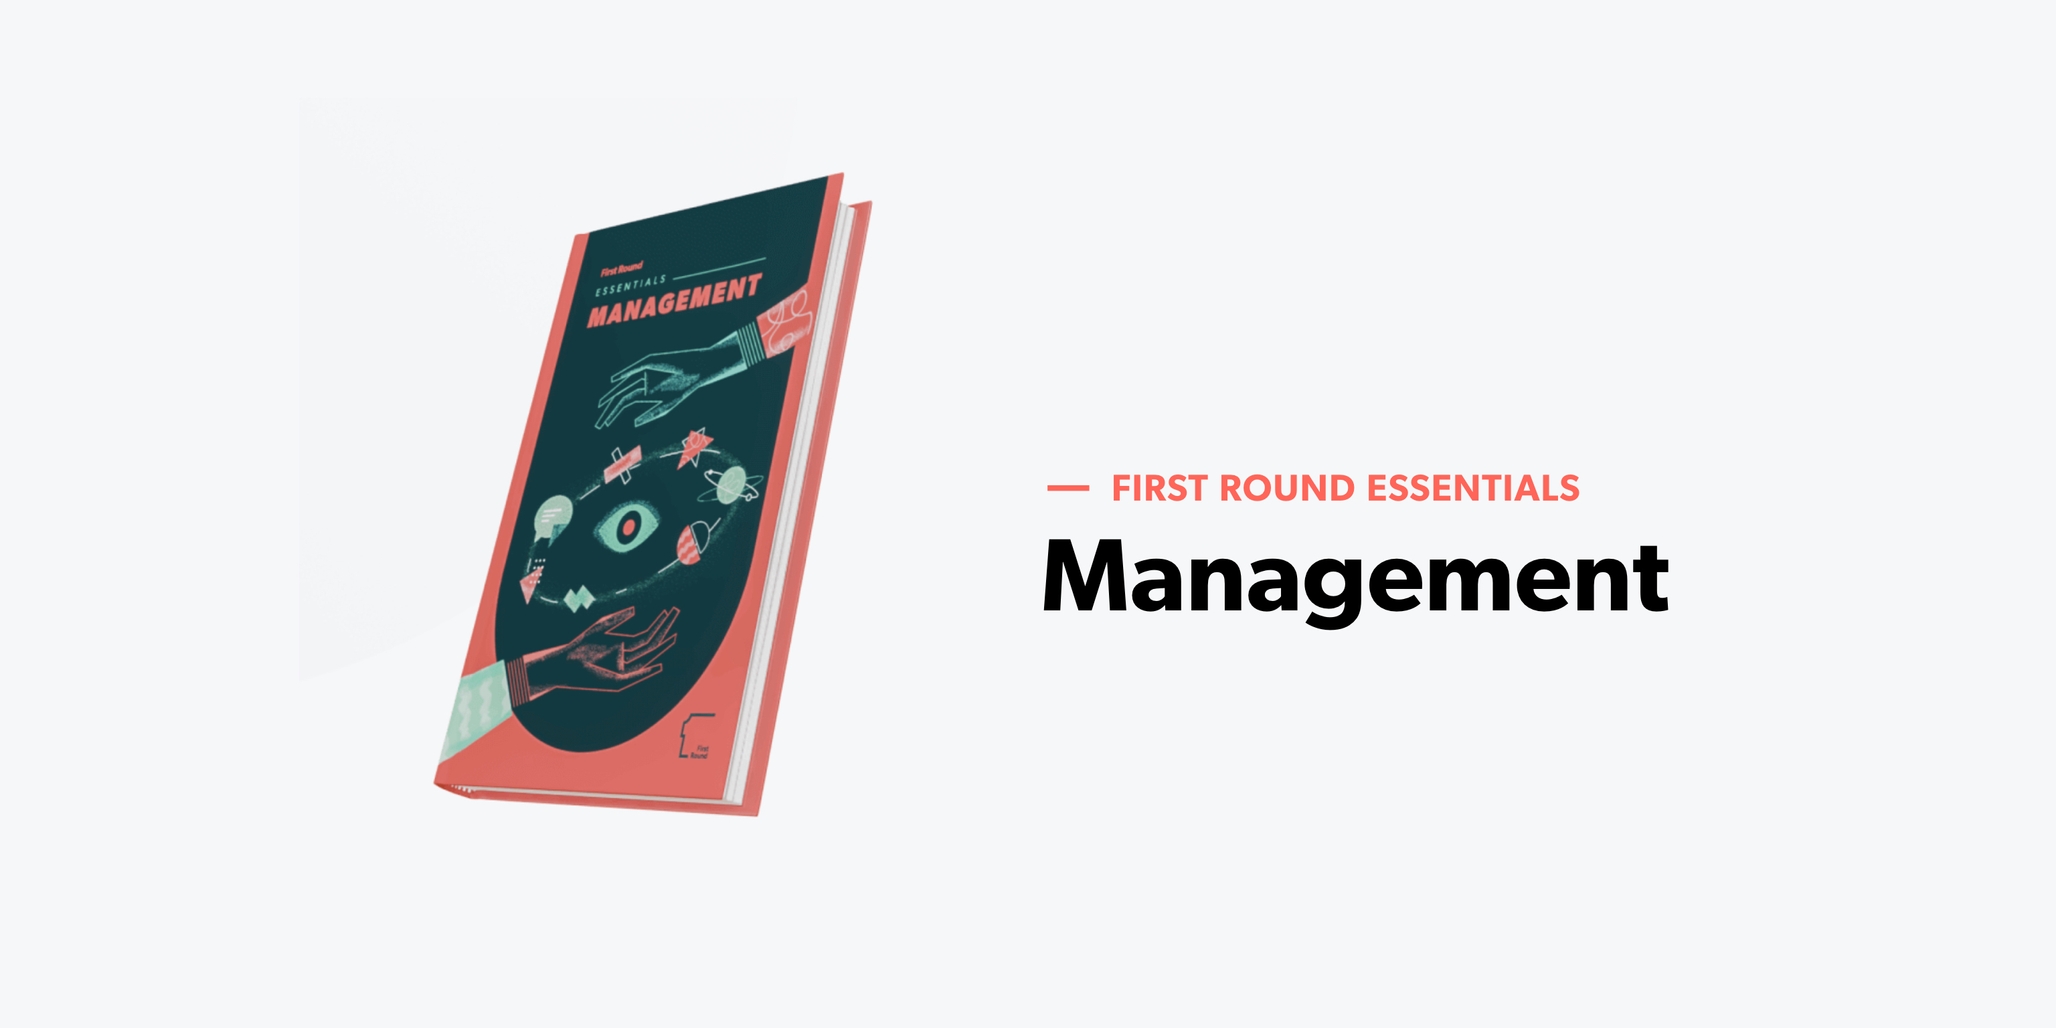 Cover image for Announcing First Round Essentials — After Publishing 180+ Articles on Management, We're Releasing Our First Book